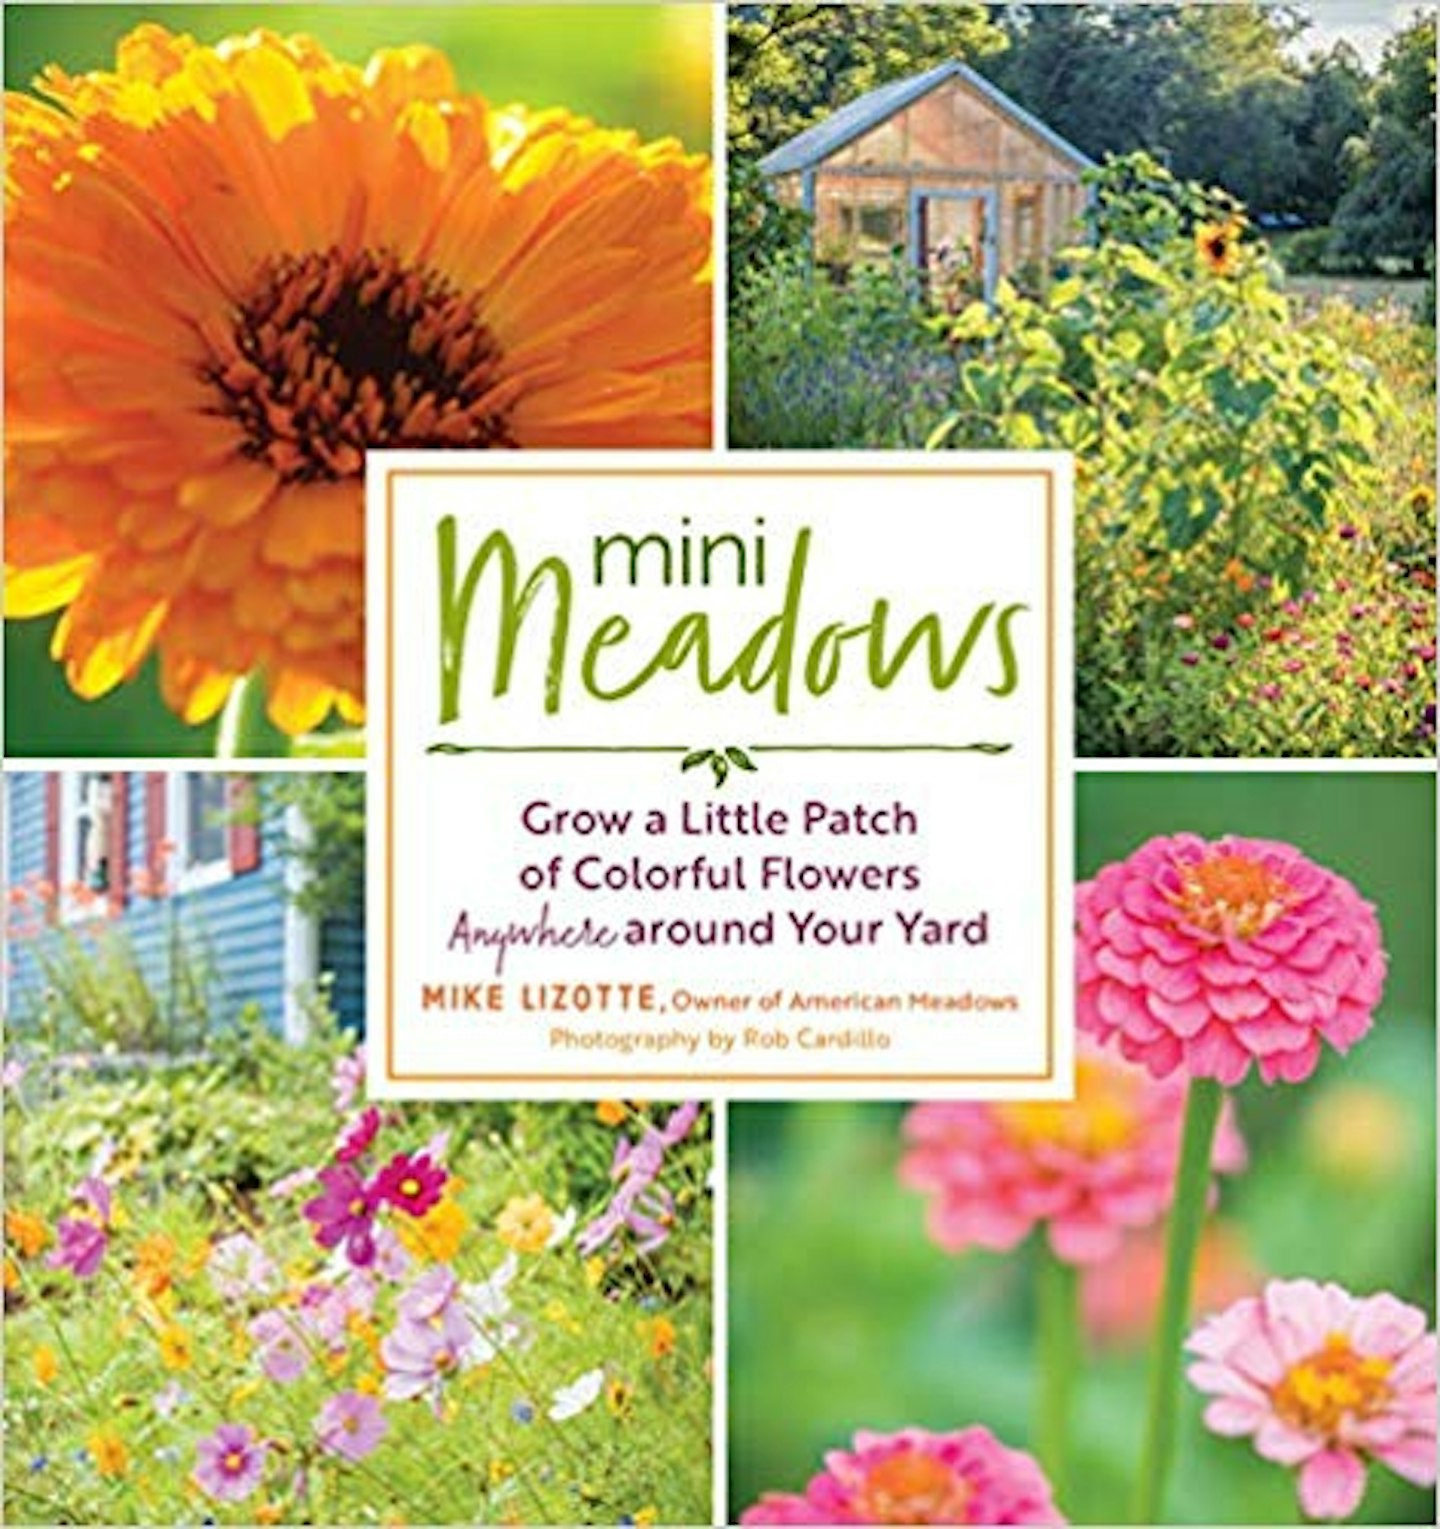 Mini Meadows: Grow a Little Patch of Colorful Flowers Anywhere Around Your Yard Paperback u2013 Illustrated, 1 April 2019 by Mike Lizotte